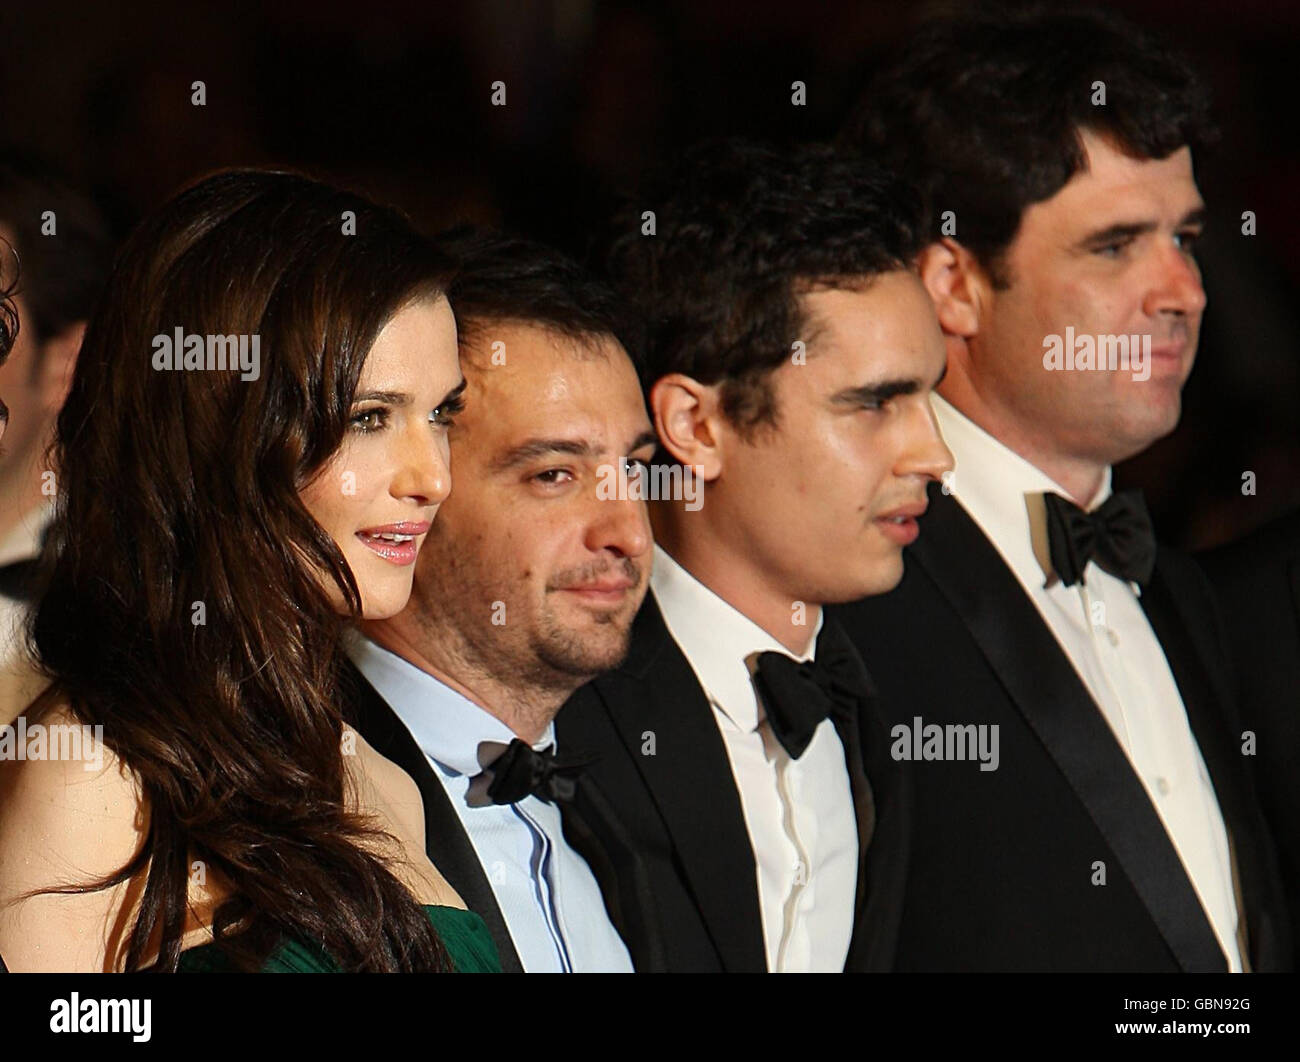 (left to right) Rachel Weisz, Alejandro Amenabar and Max Minghella arriving for the official screening of Agora at the Palais de Festival during the 62nd Cannes Film Festival, France. Stock Photo